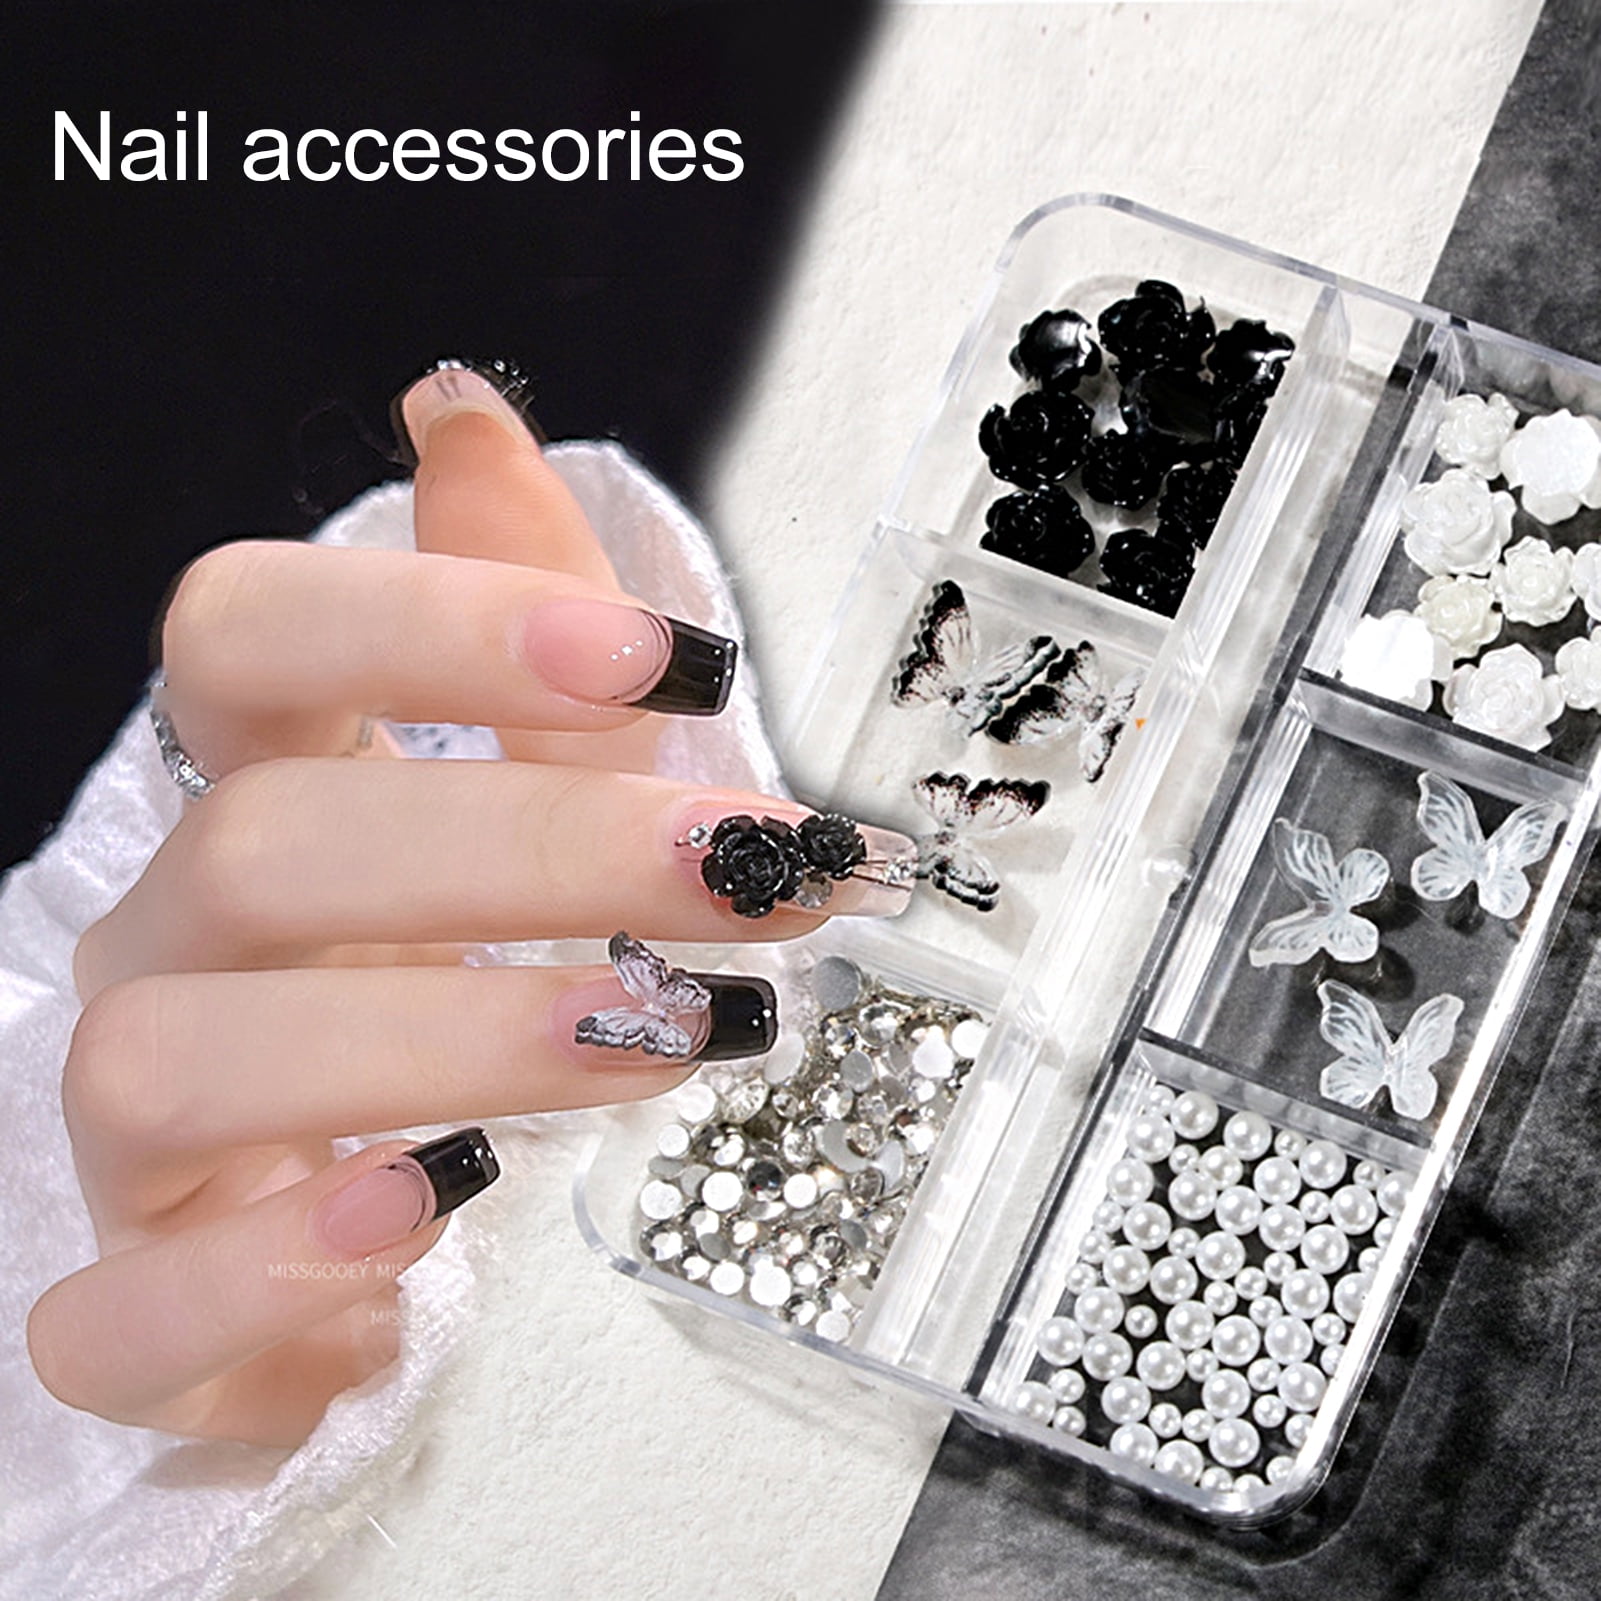 3D Nail Art Supplies Jewelry Pearls Mixed Camellia Nail Art Set Nail  Glitter 5D Rose Round Pearl Rhinestones Caviar Beads Nails Charms Tips  Accessories for Women Acrylic Nail Art Decorations : Amazon.co.uk: